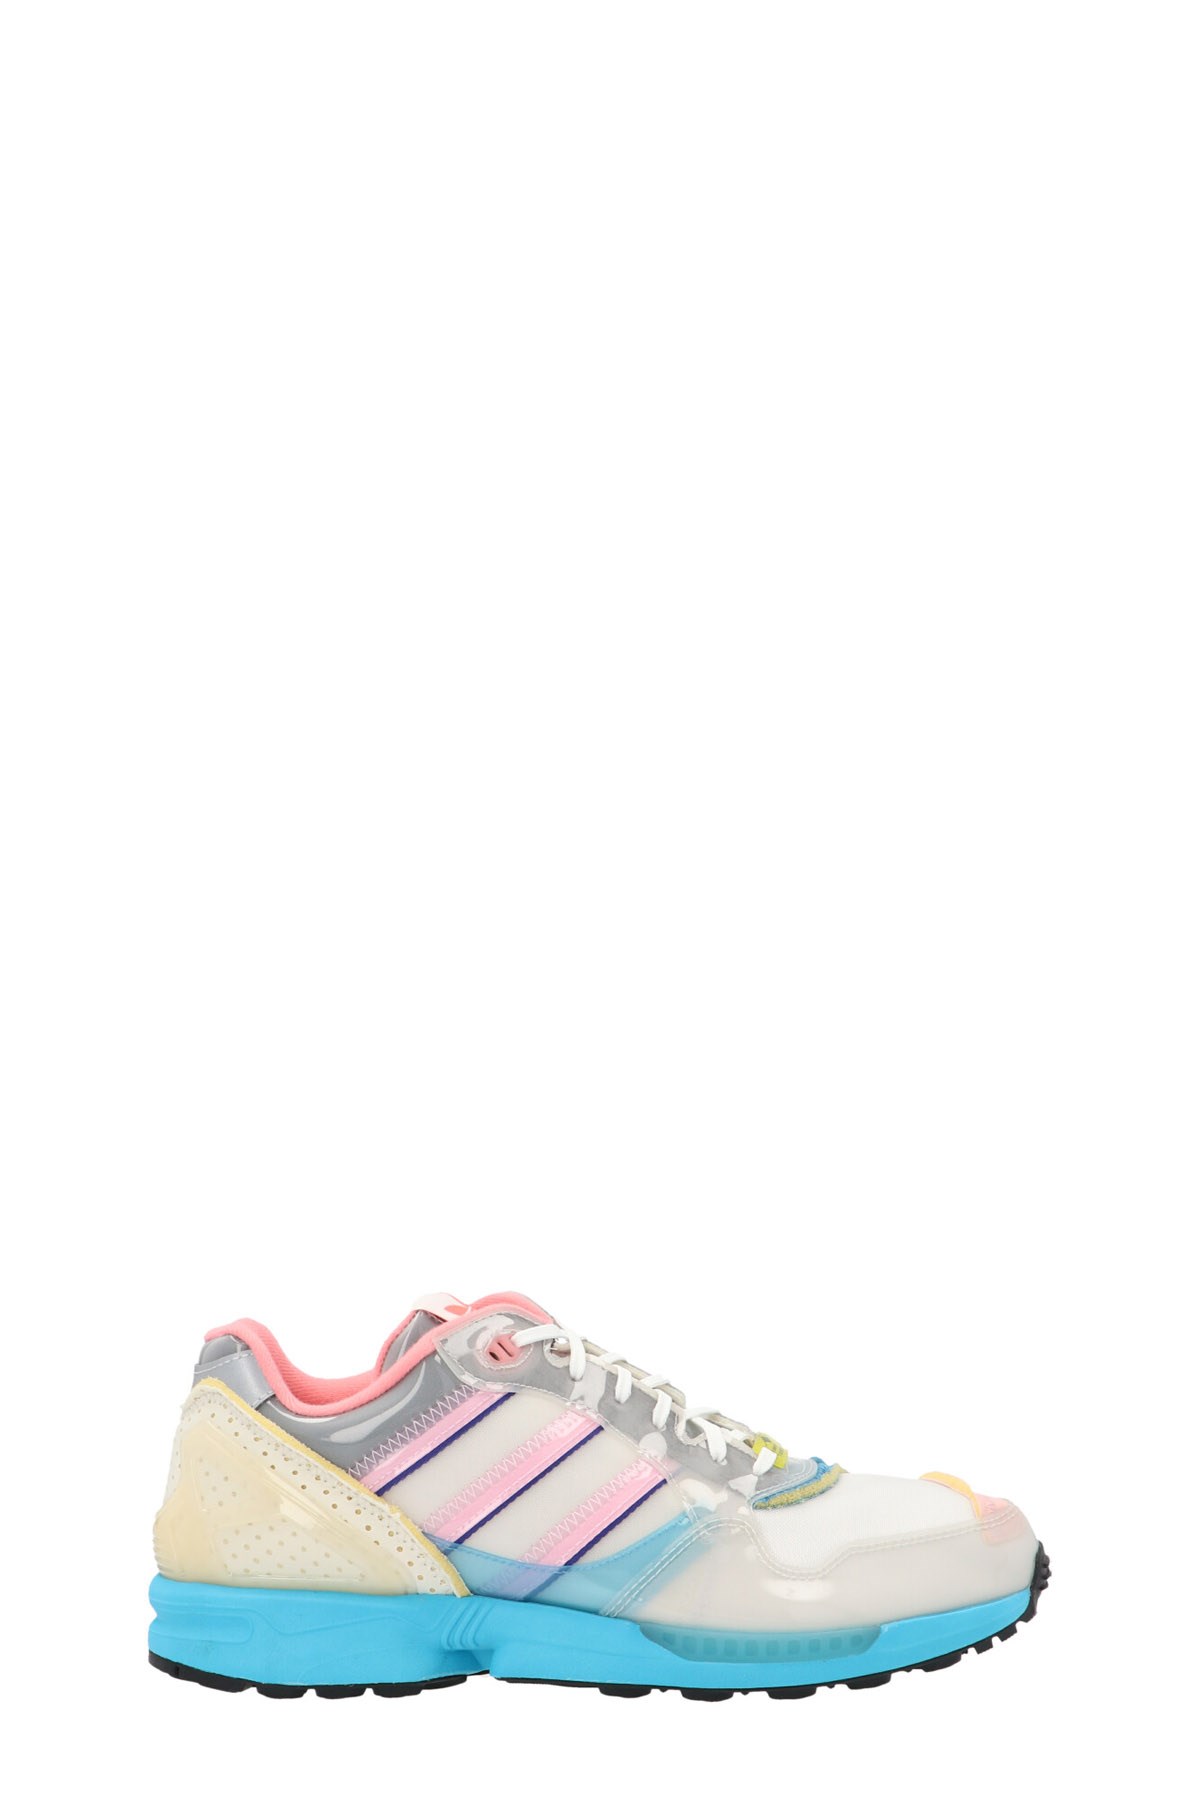 ADIDAS STATEMENT Xz 0006 Inside Out' Kapsel Energy Pack Sneakers